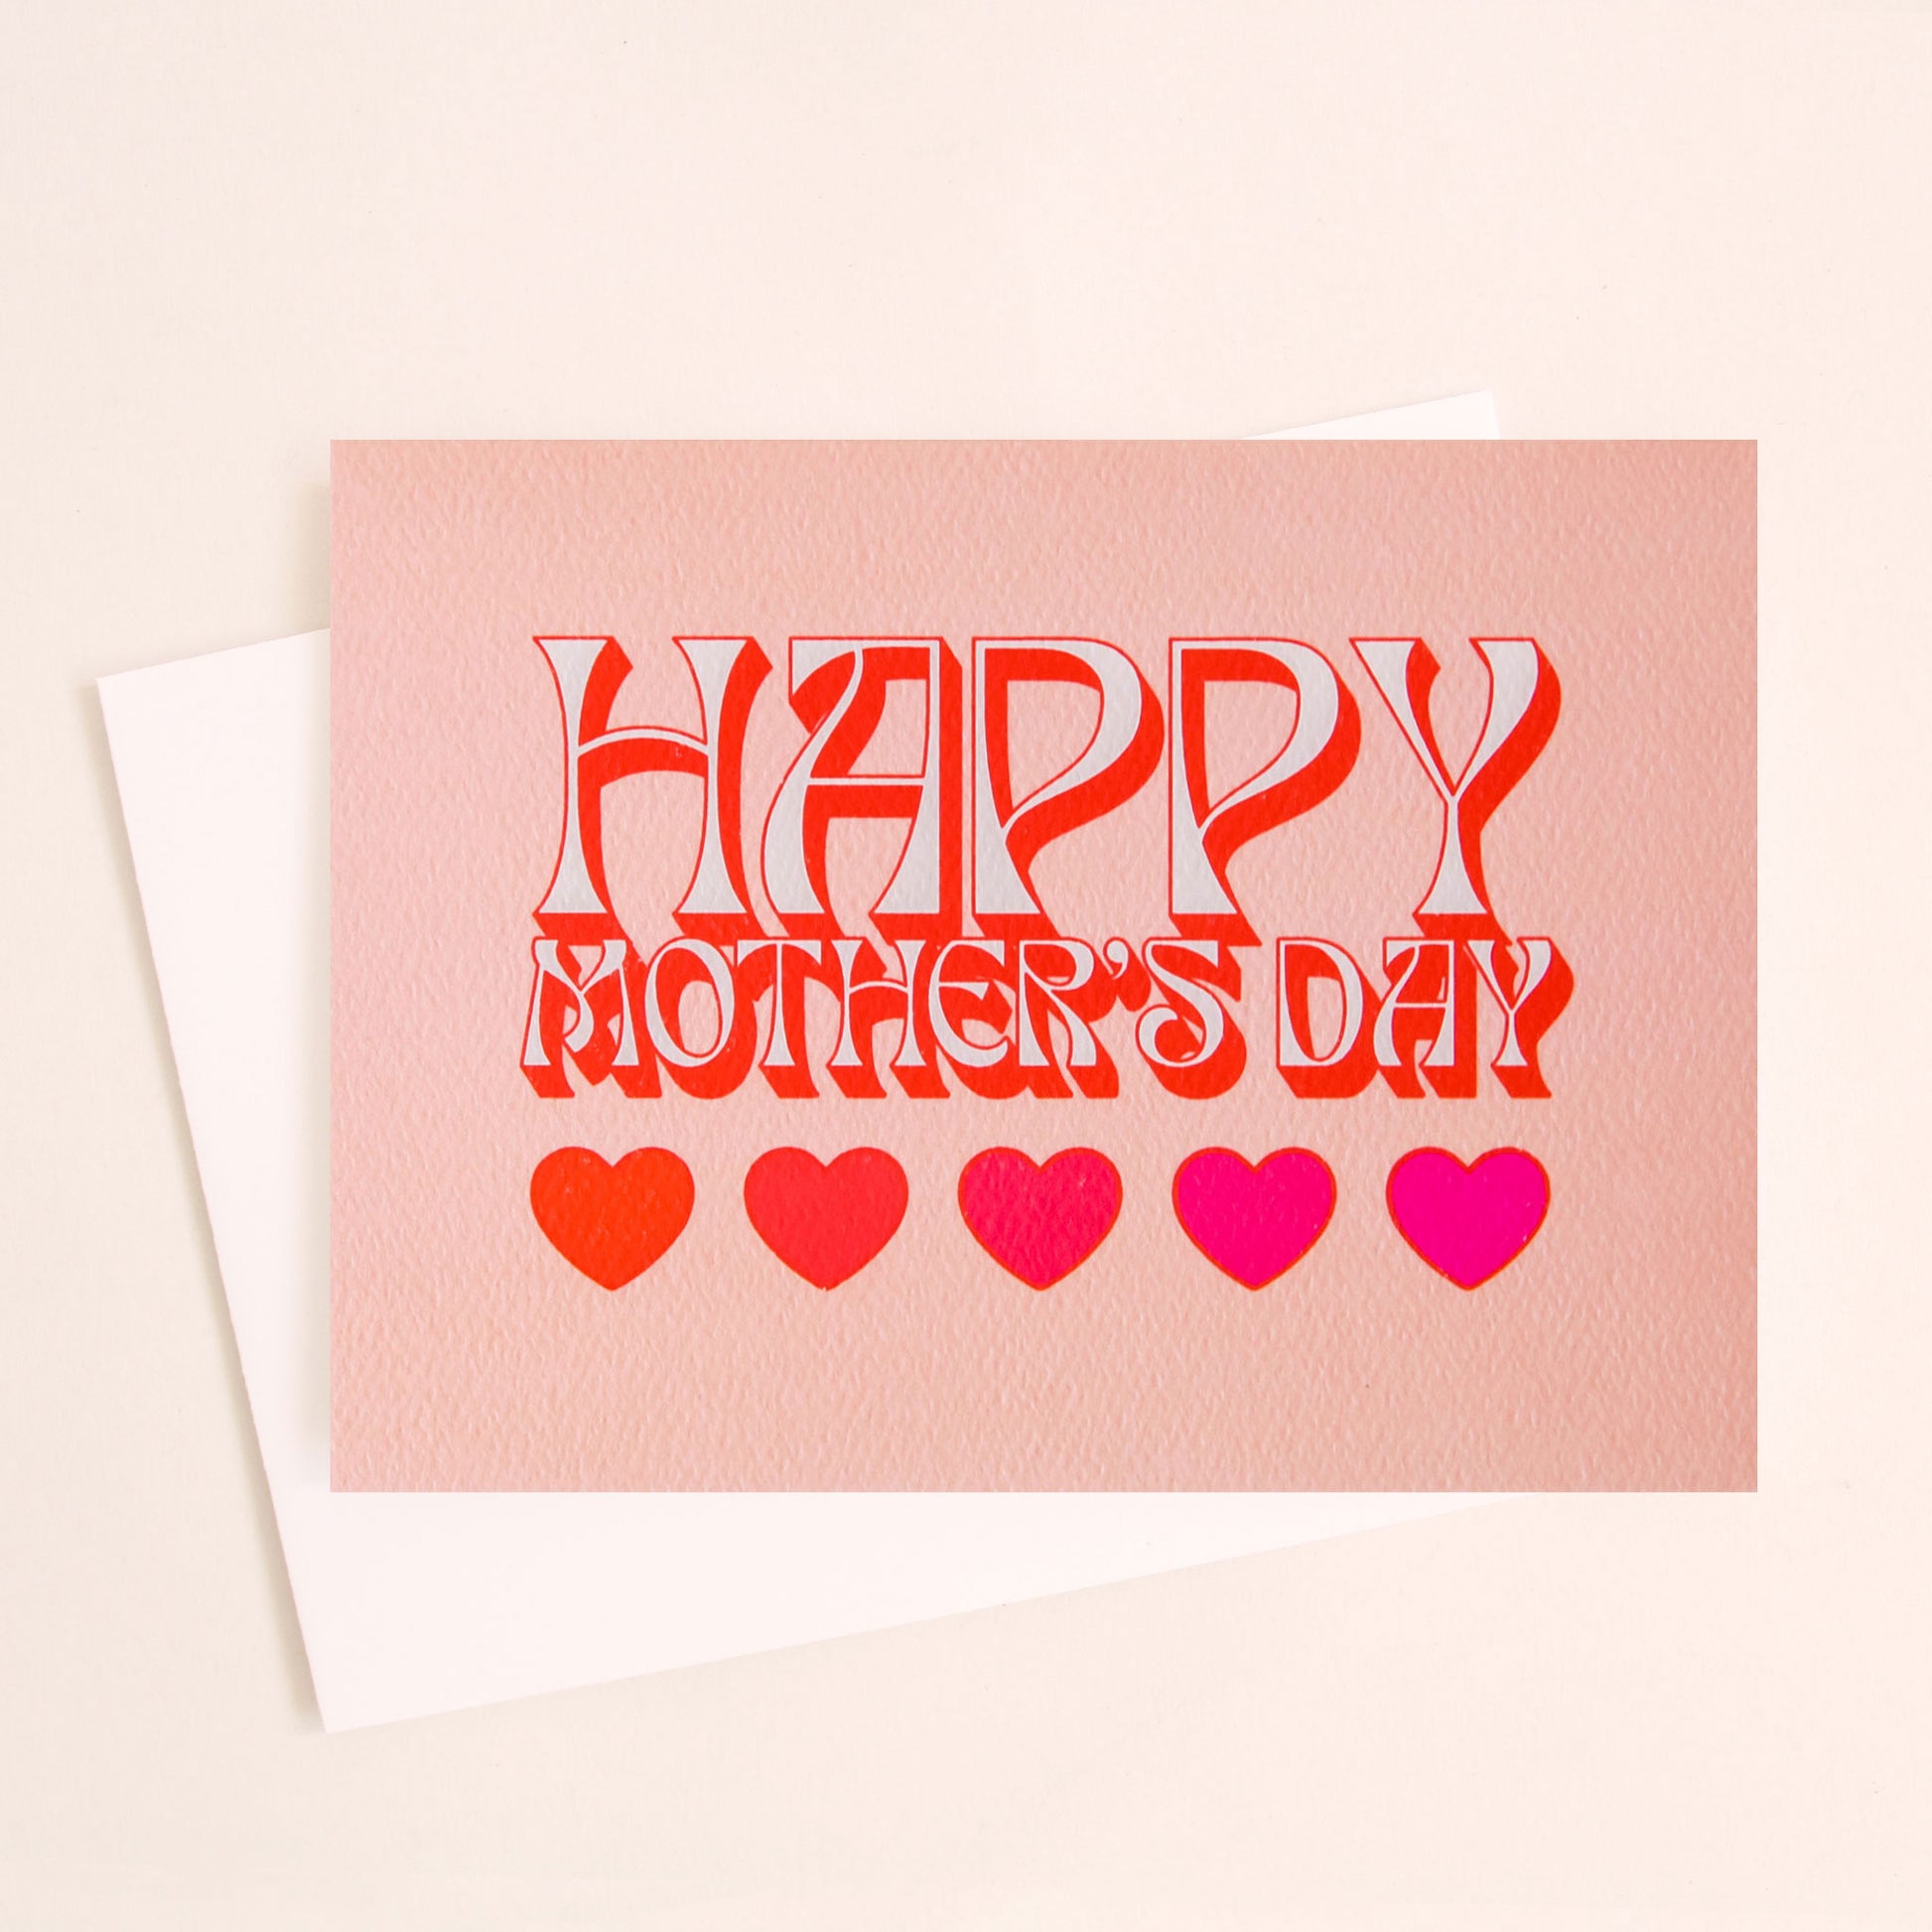 Soft pink card that reads 'Happy Mother's Day' in retro white lettering with a red shadow. Below is a row of five hearts in various reds and pinks. The card is accompanied by a solid white envelope.